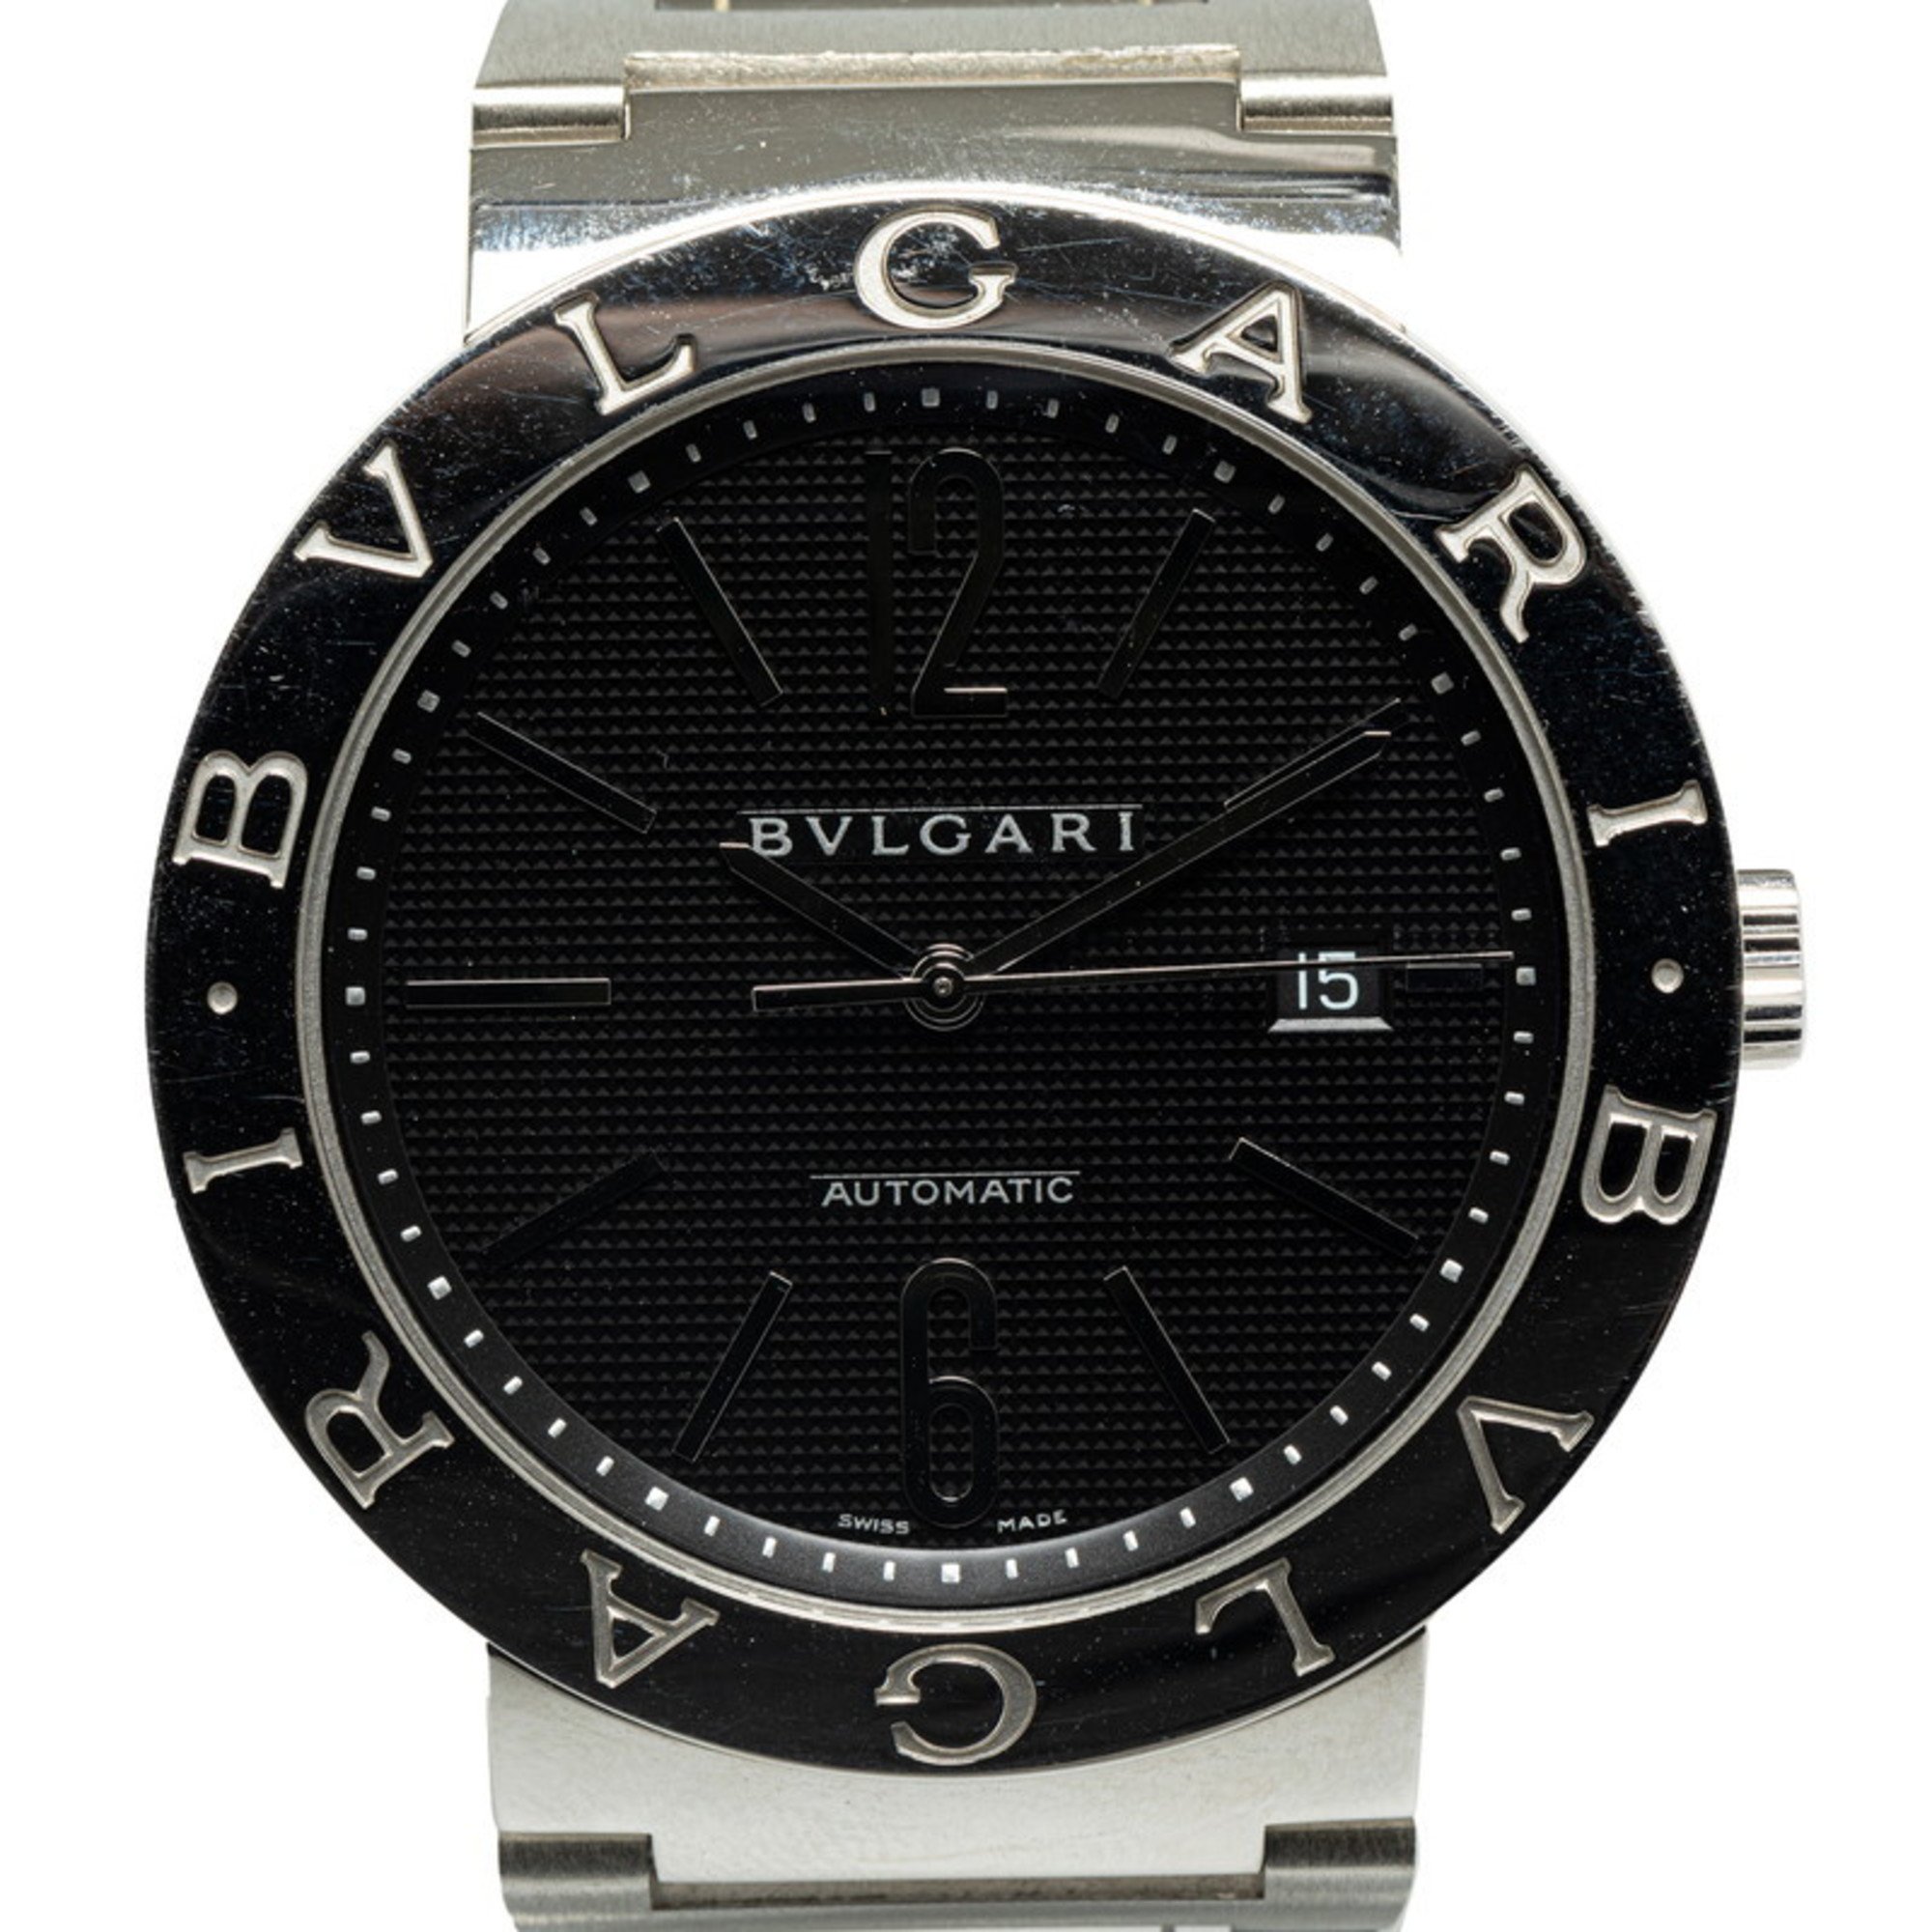 BVLGARI Wristwatch BB42SS AUTO Automatic Black Dial Stainless Steel Men's